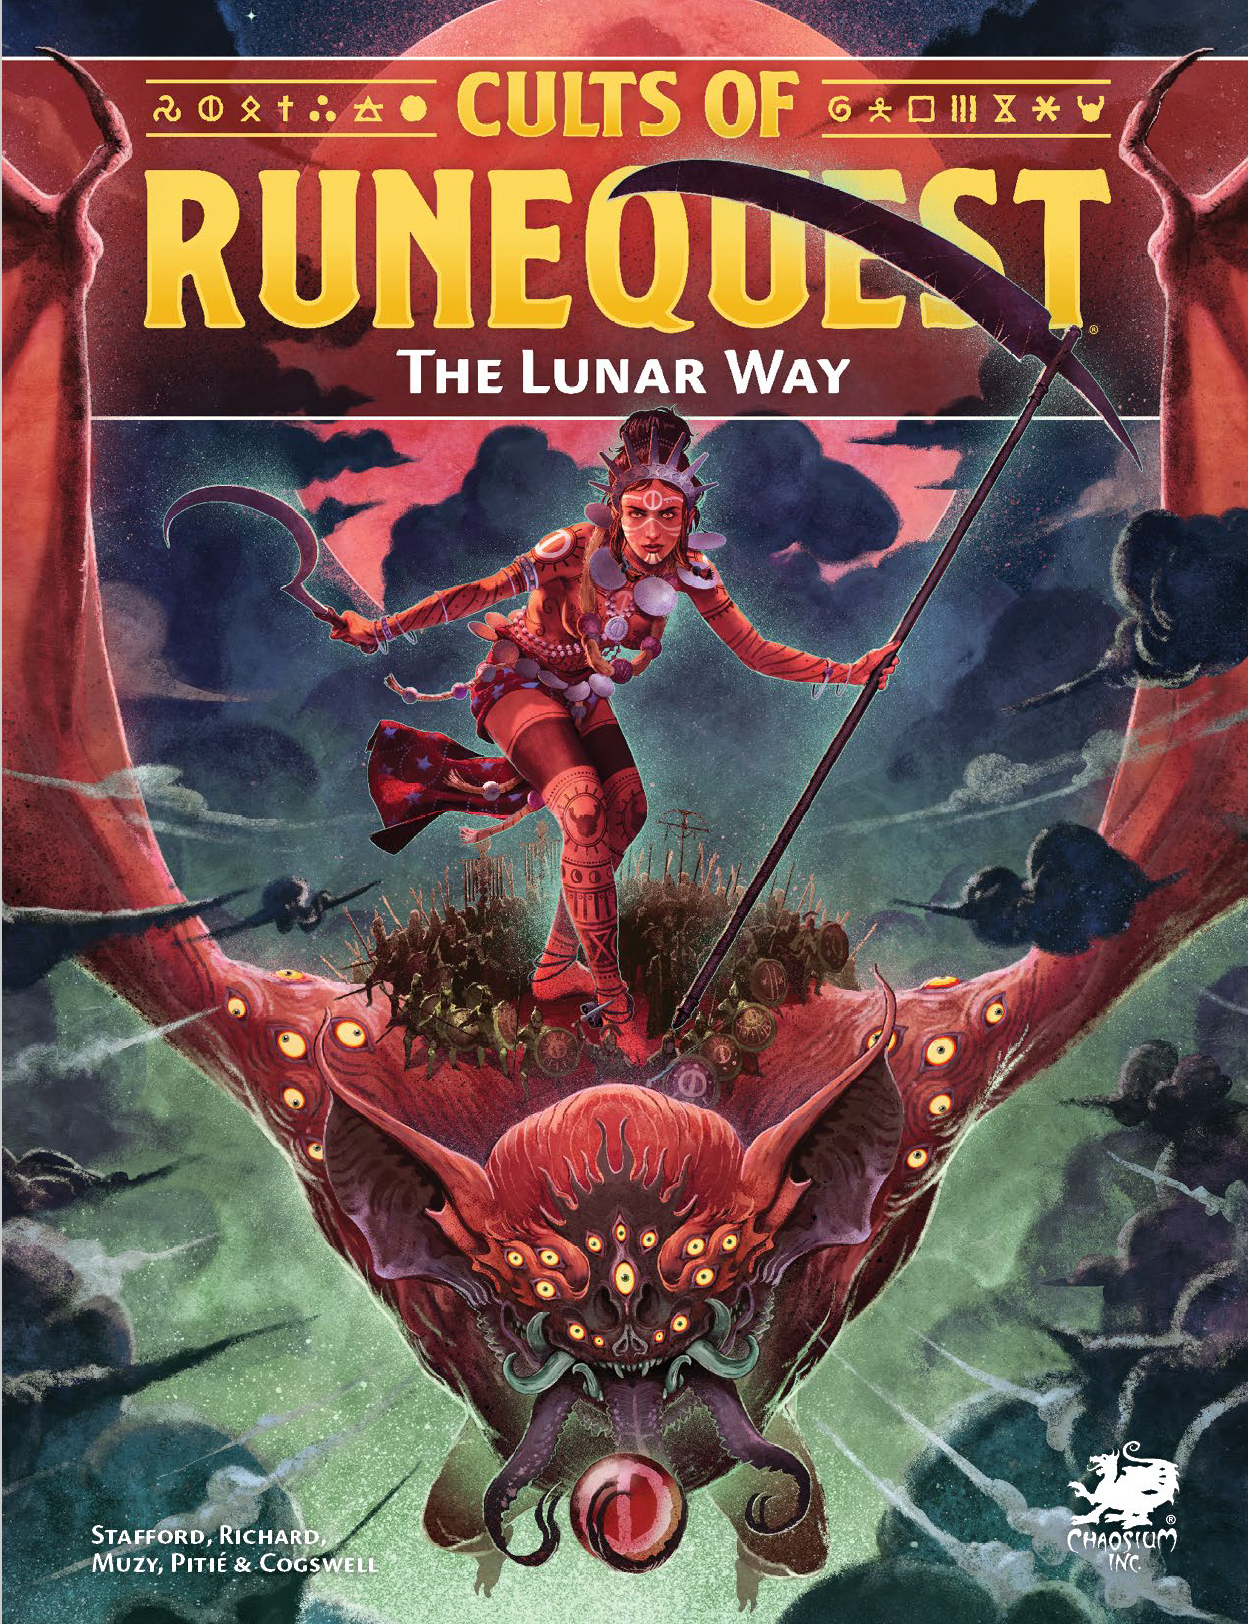 Greg Stafford: Cults of RuneQuest: The Lunar Way (Hardcover, Chaosium)